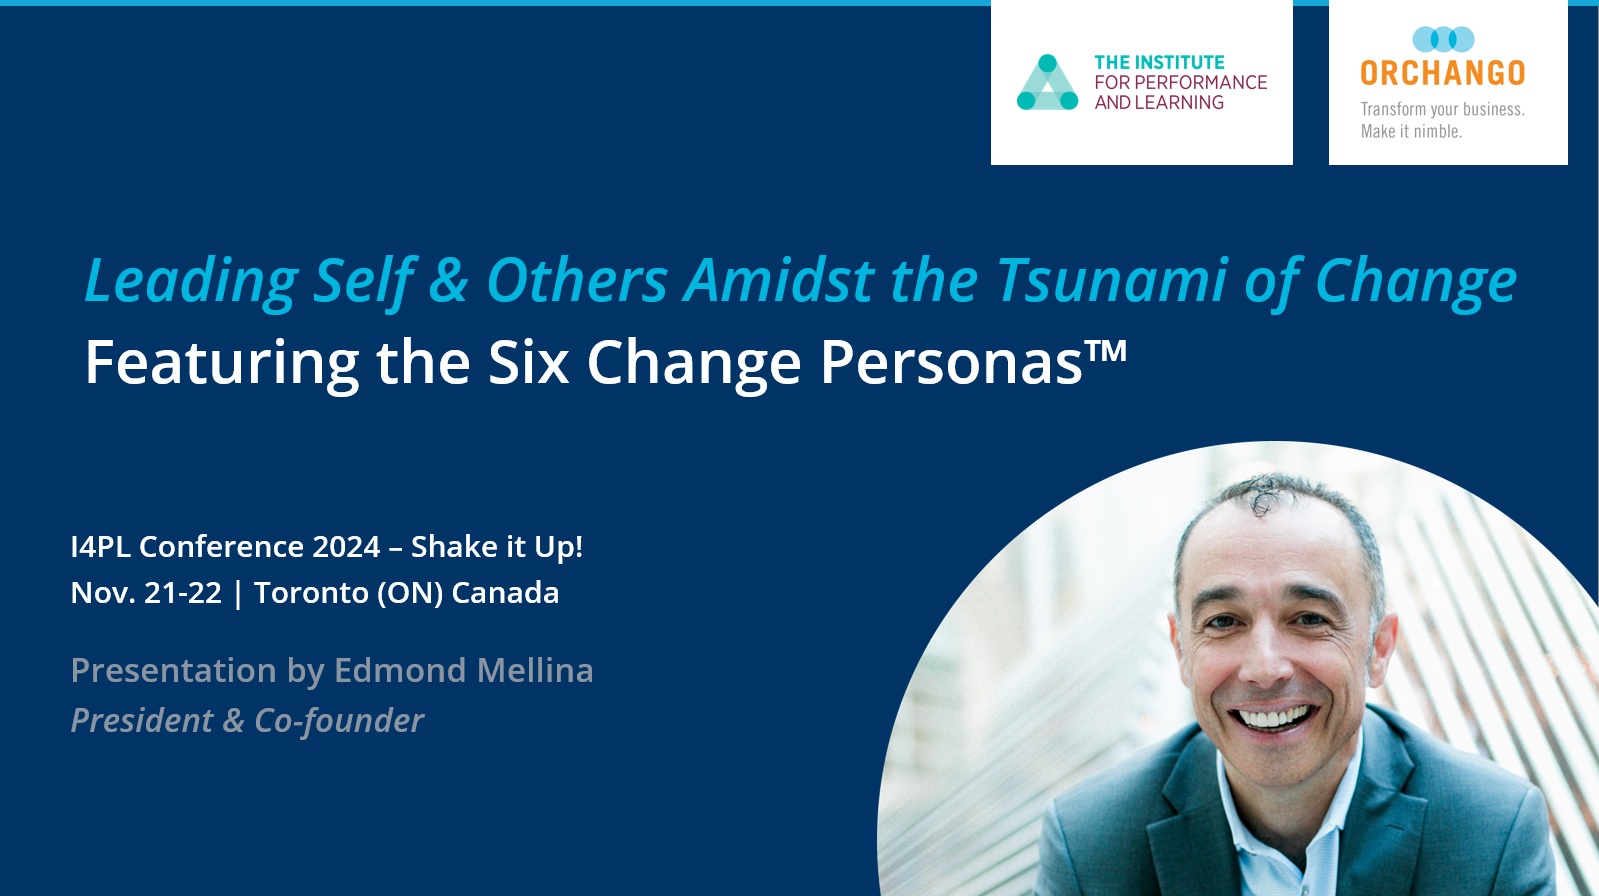 Leading Self & Others Amidst the Tsunami of Change Featuring the Six Change Personas™ Presentation by ORCHANGO president & co-founder at I4PL Conference 2024 – Shake it Up! Nov. 21-22 | Toronto (ON) Canada.